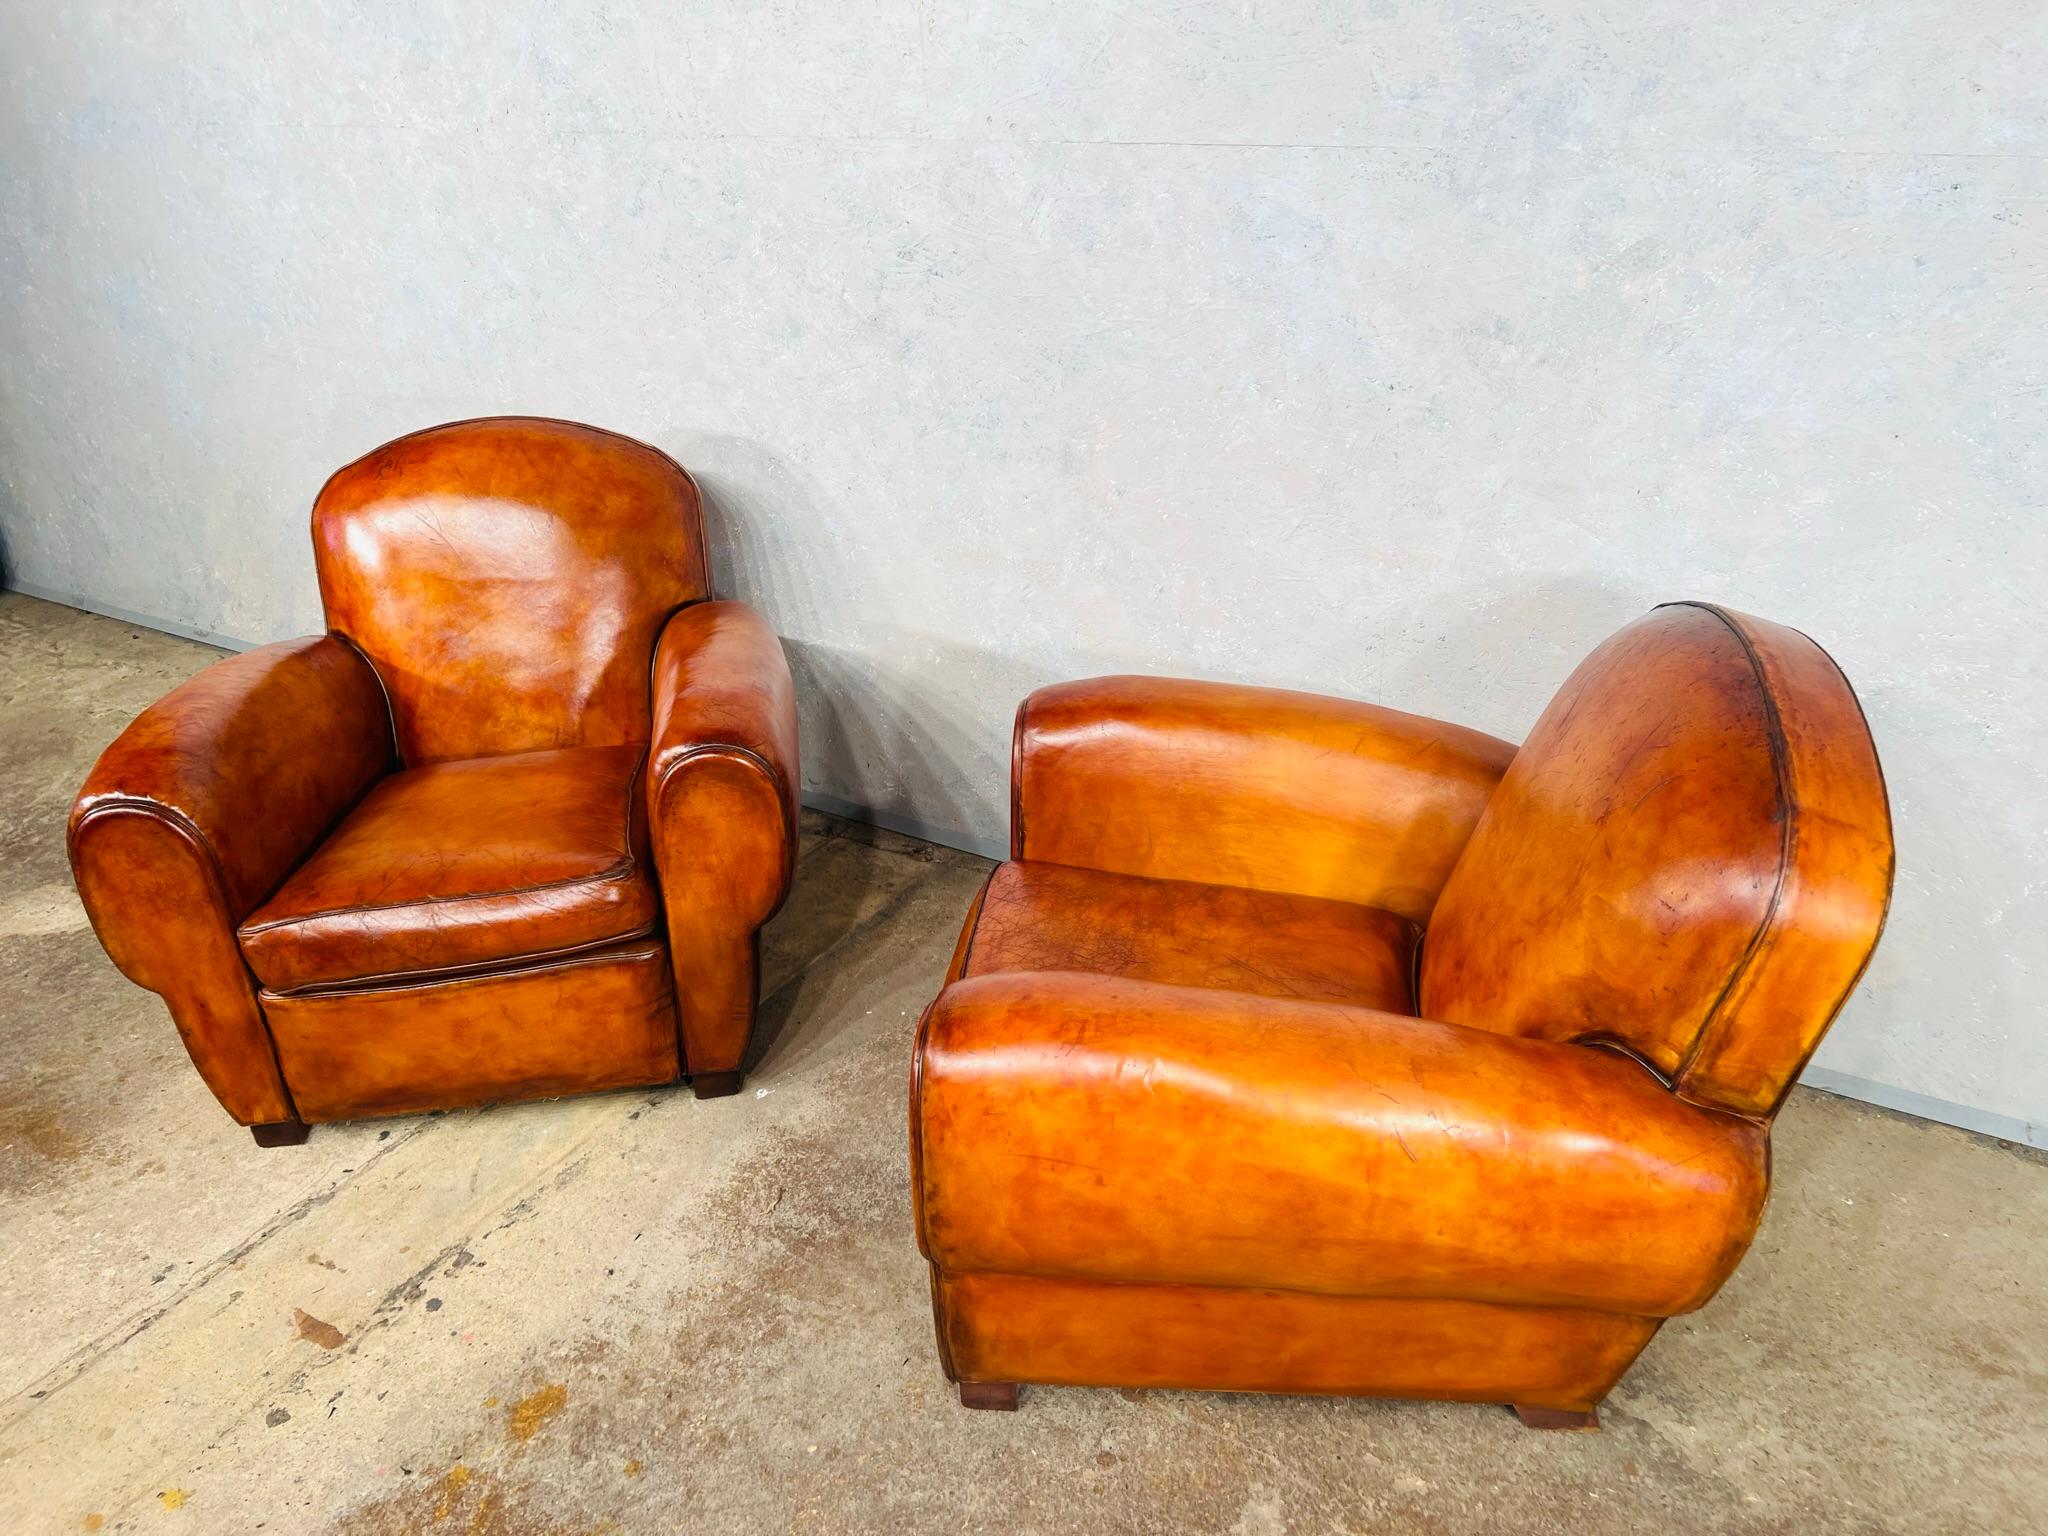 Stunning Pair of Leather French Club Chairs circa 1930 Patinated Cognac Color In Good Condition For Sale In Lewes, GB